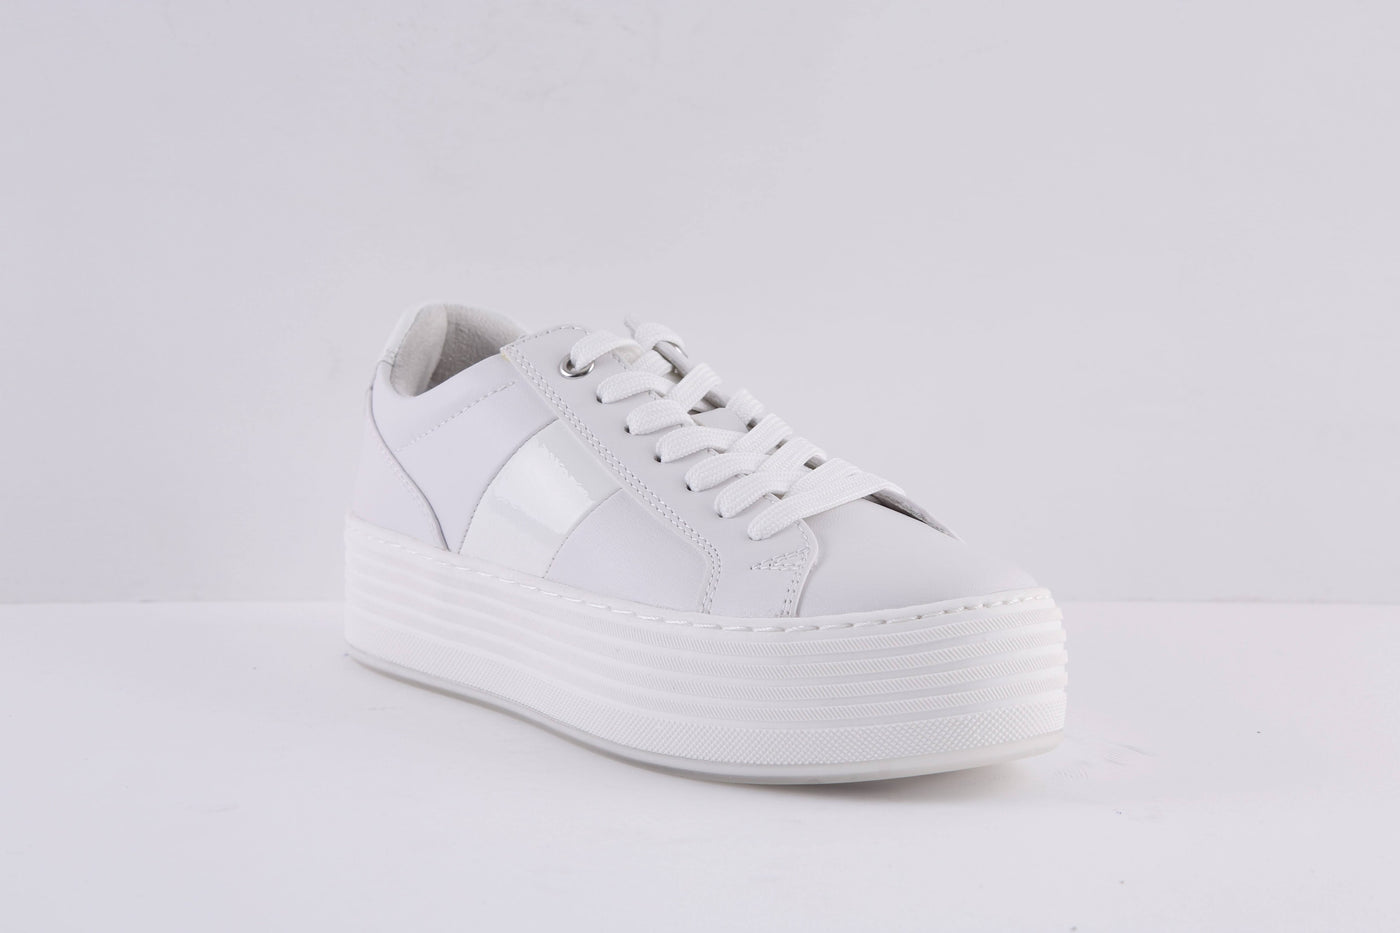 MARCO TOZZI - 23712-197 CHUNKY LACED FASHION TRAINER - WHITE